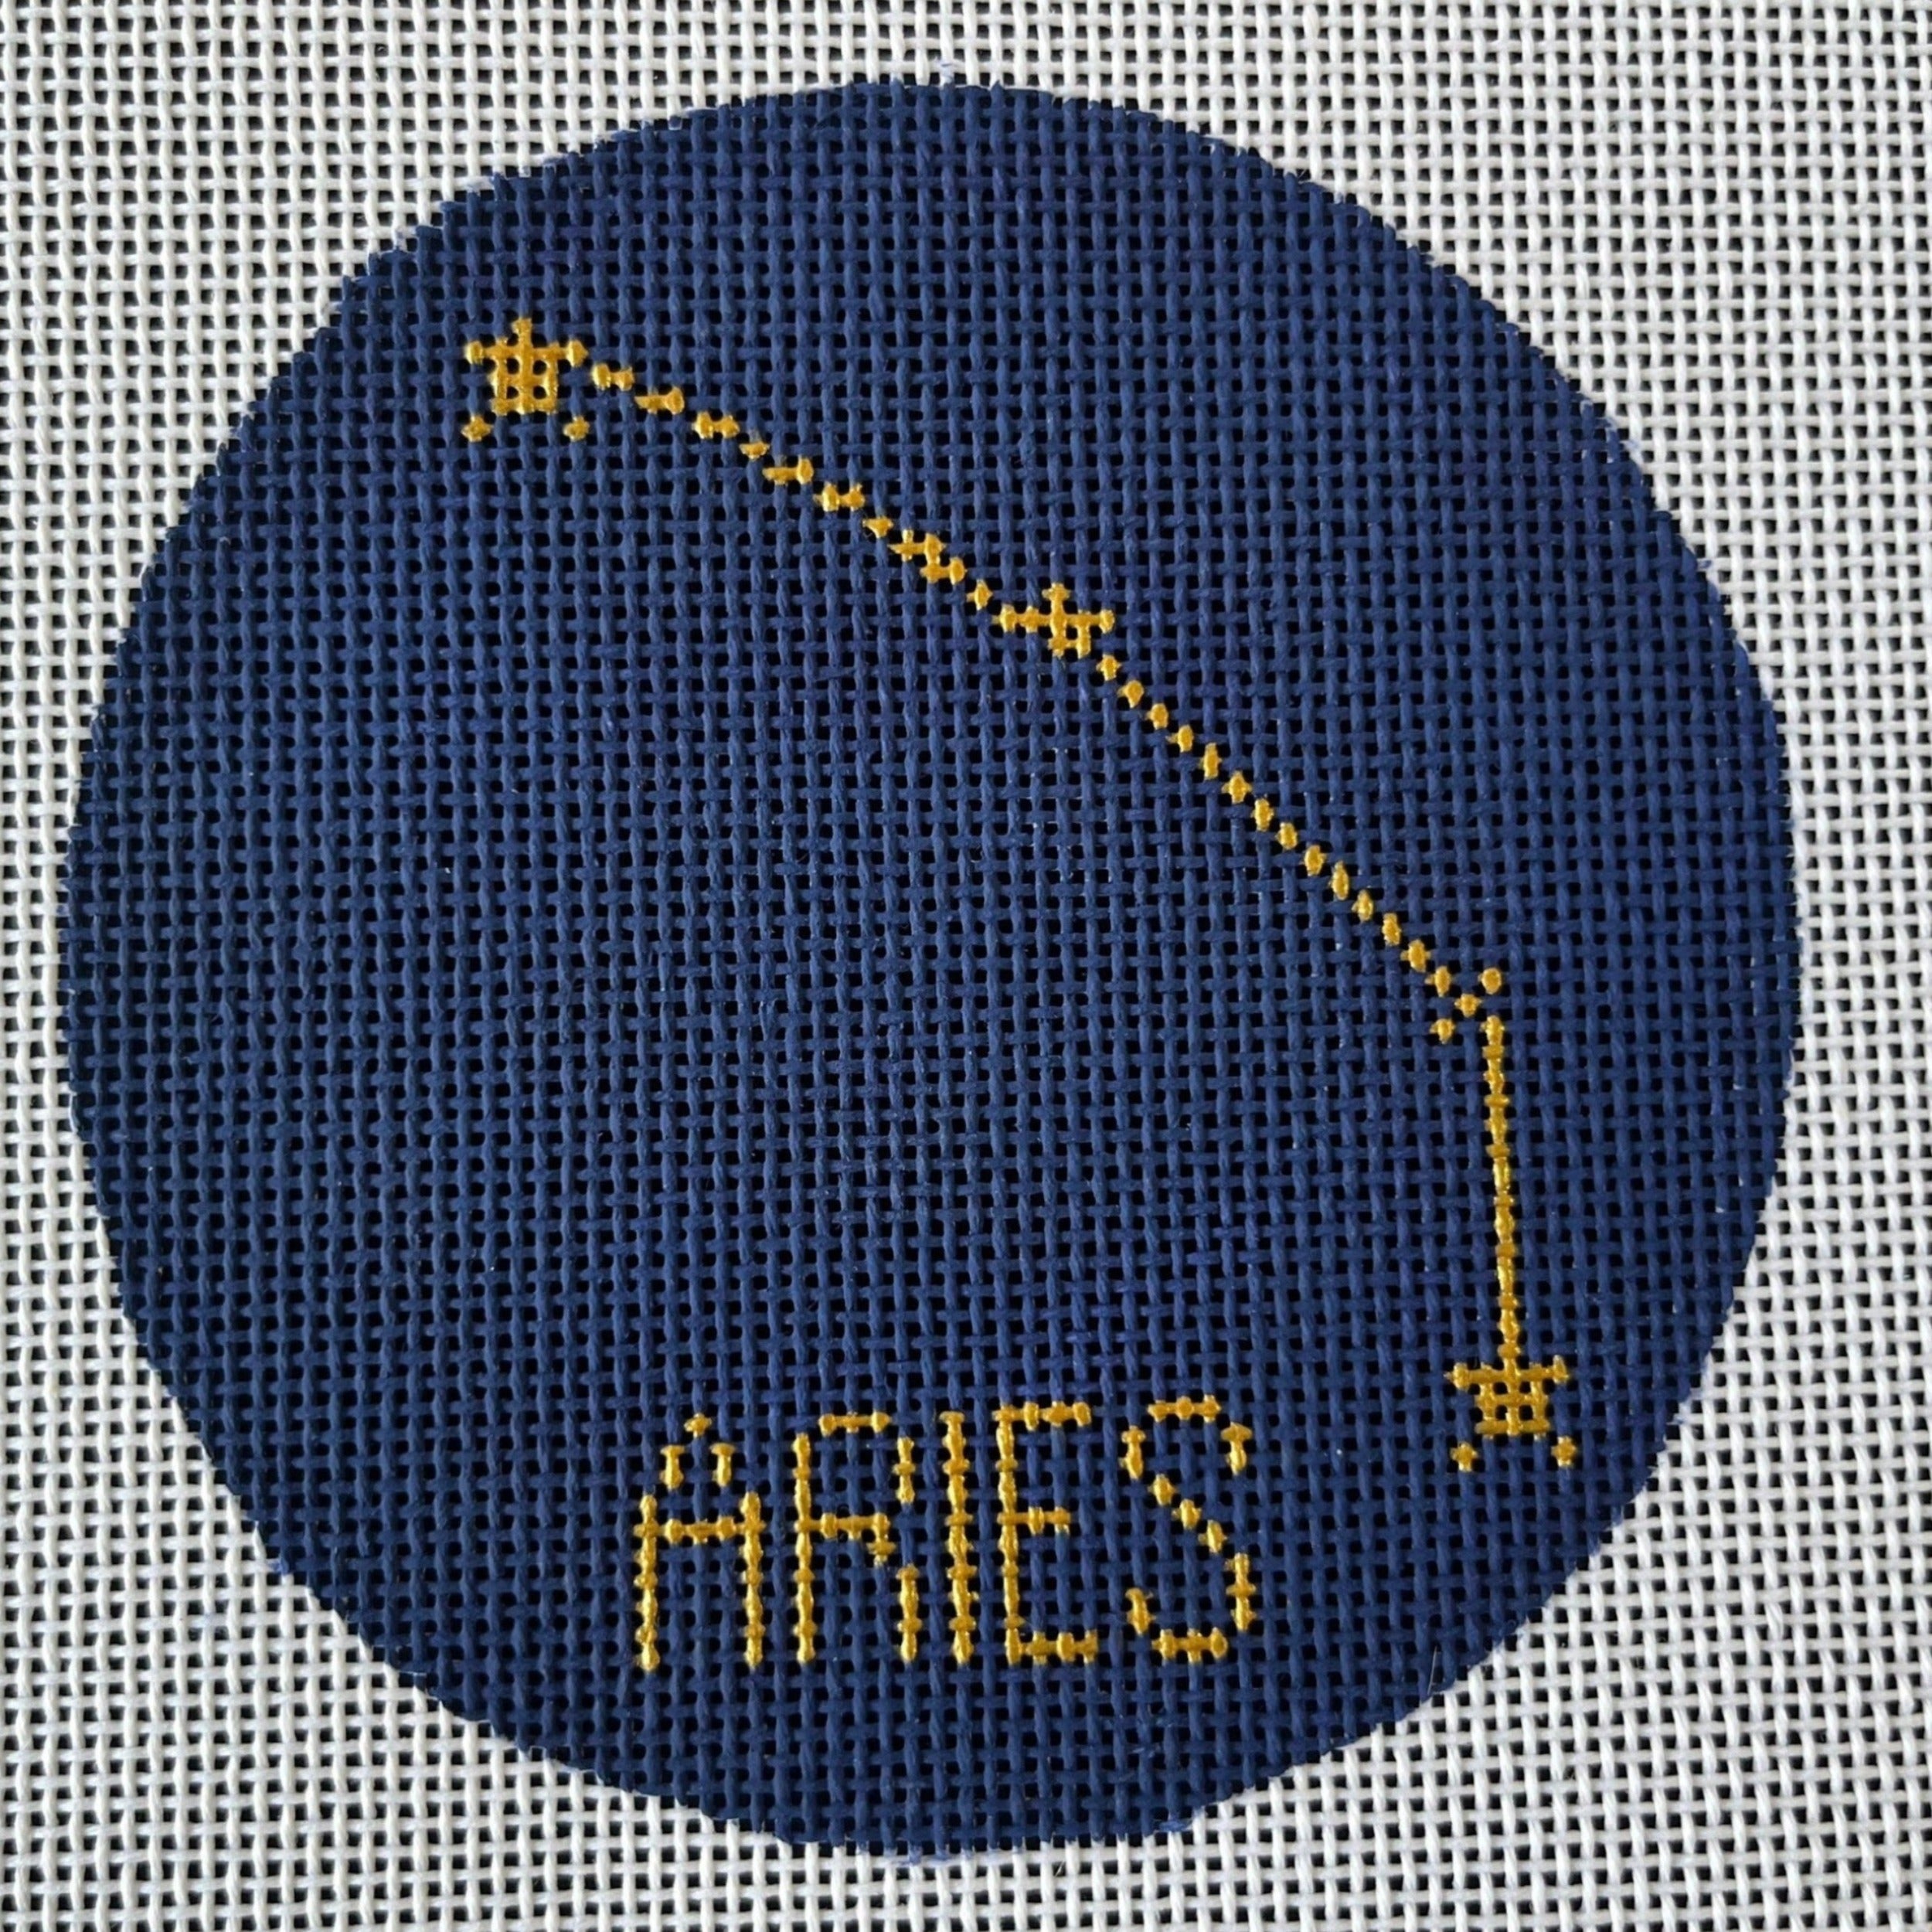 Aries Hand-painted Needlepoint Zodiac Constellation 4" Round, 18 count